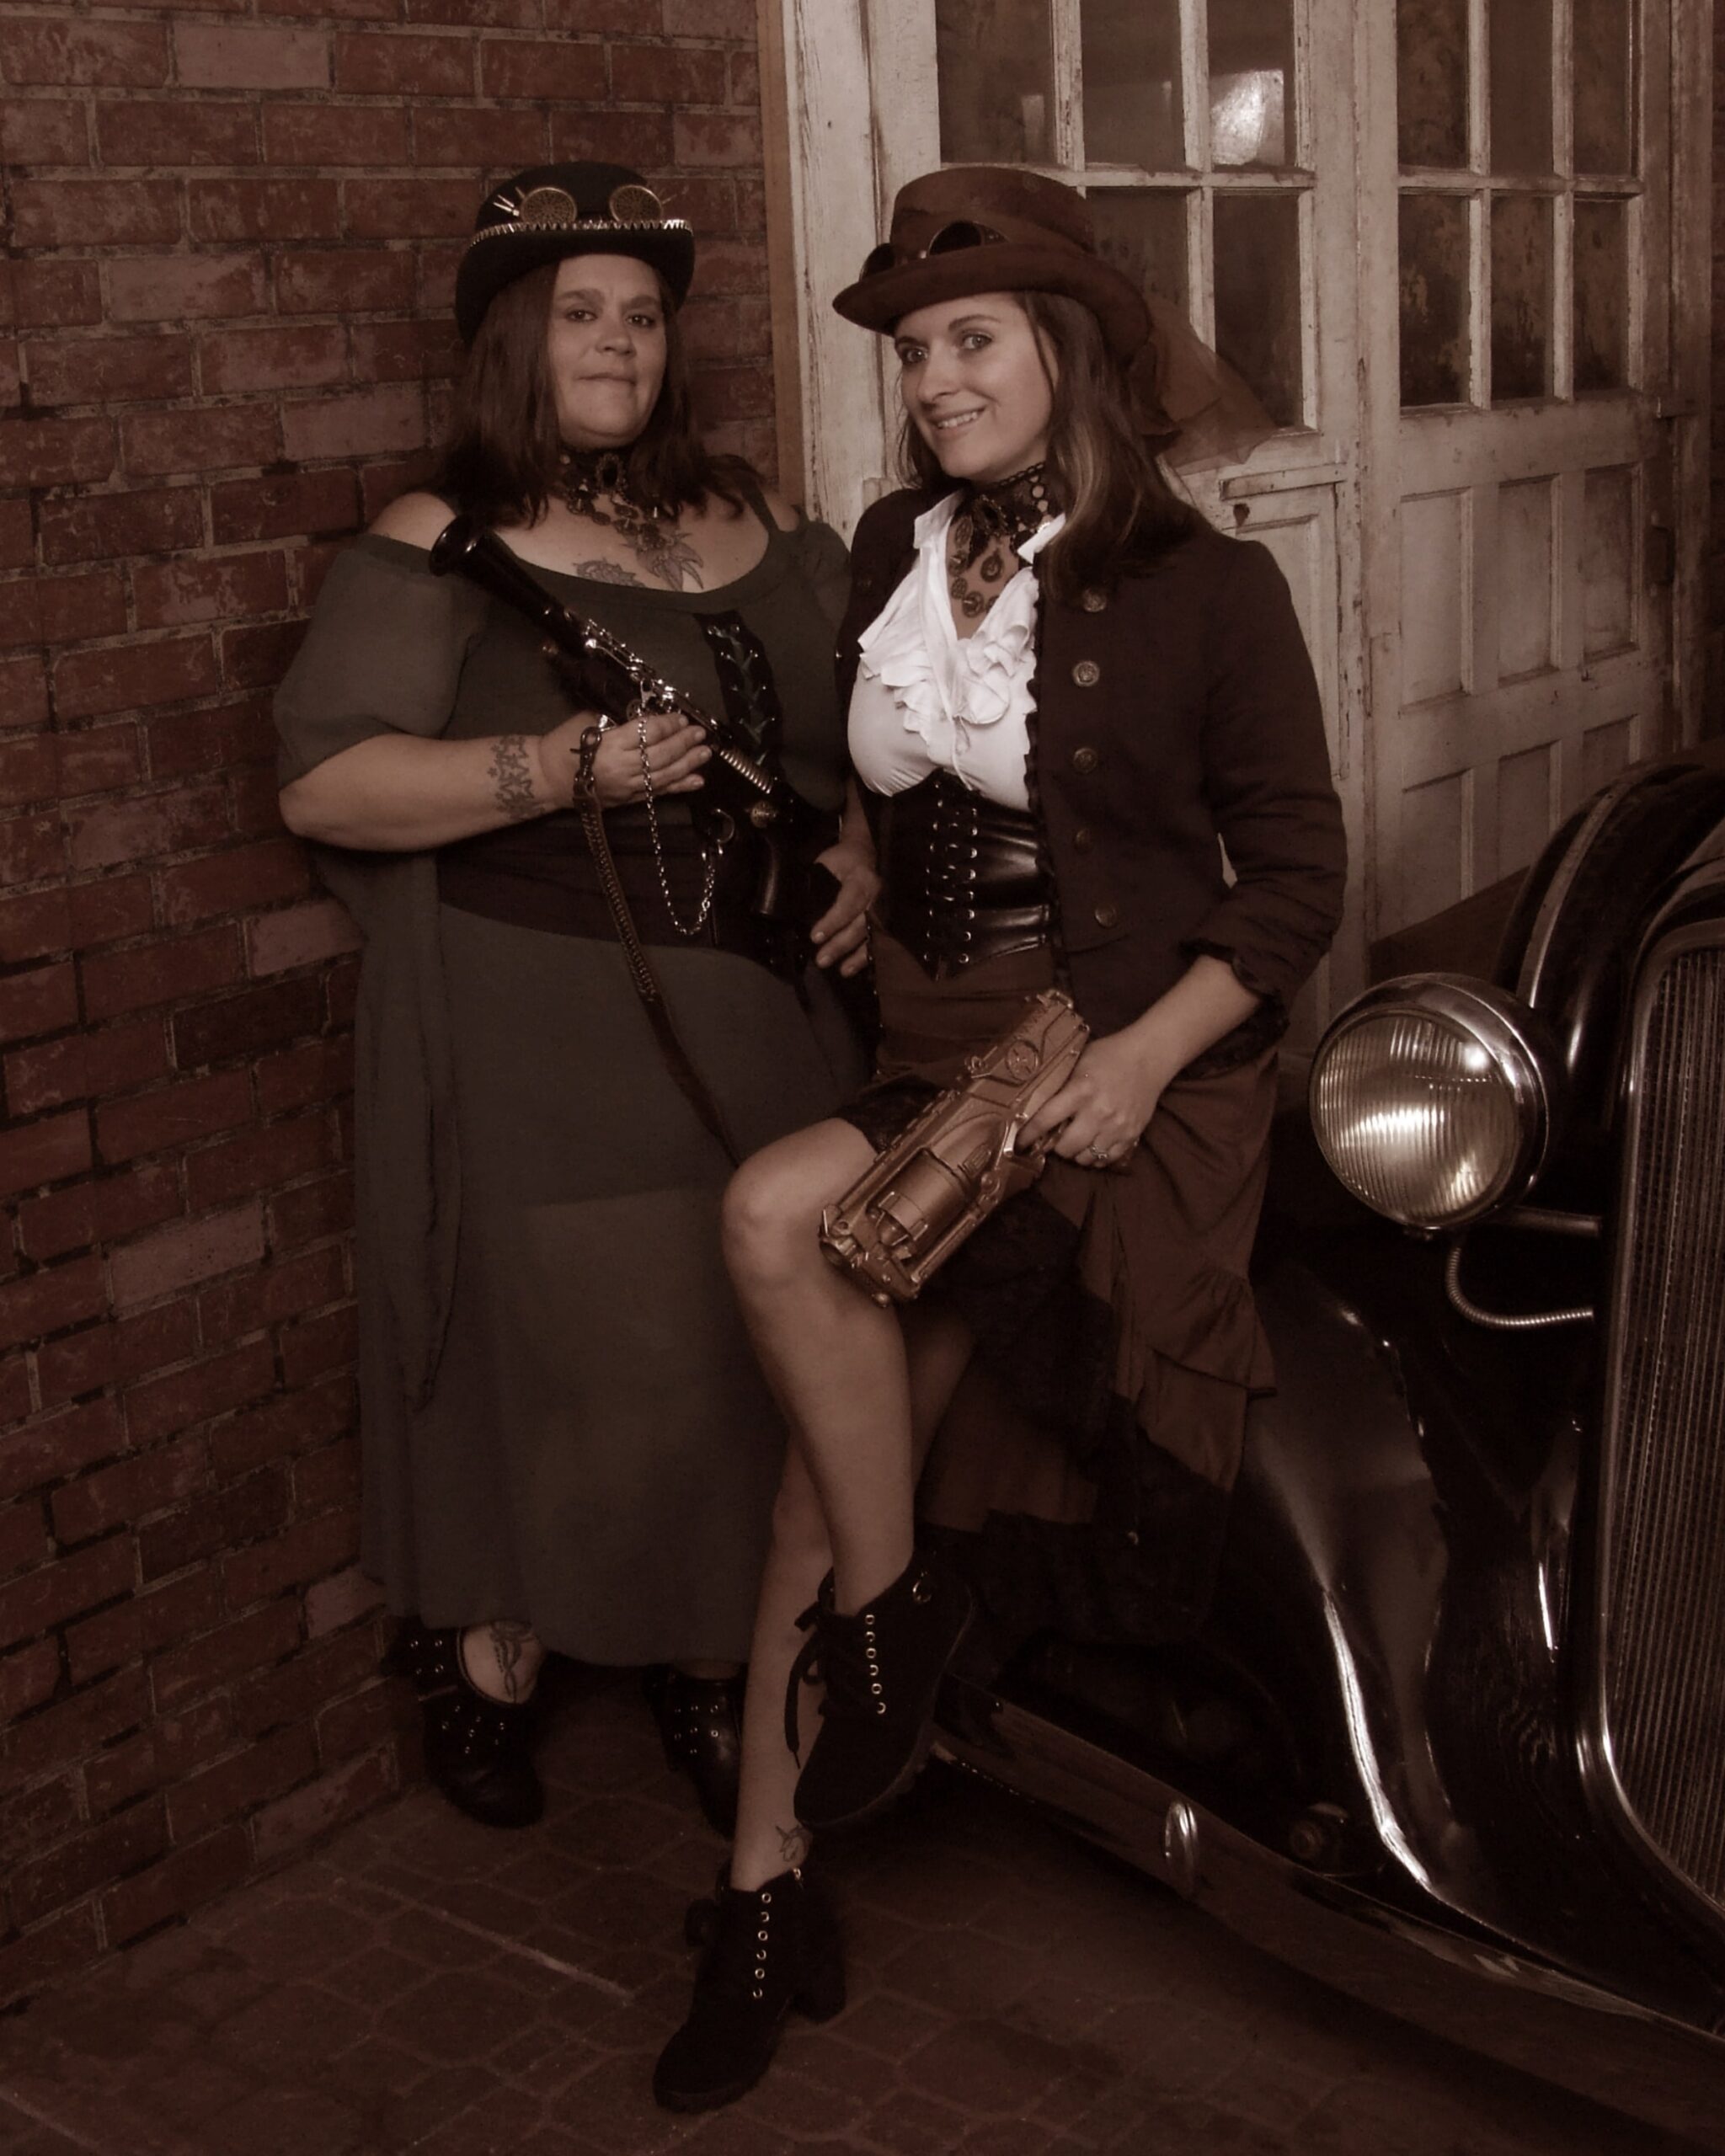 Sisters in a Steampunk